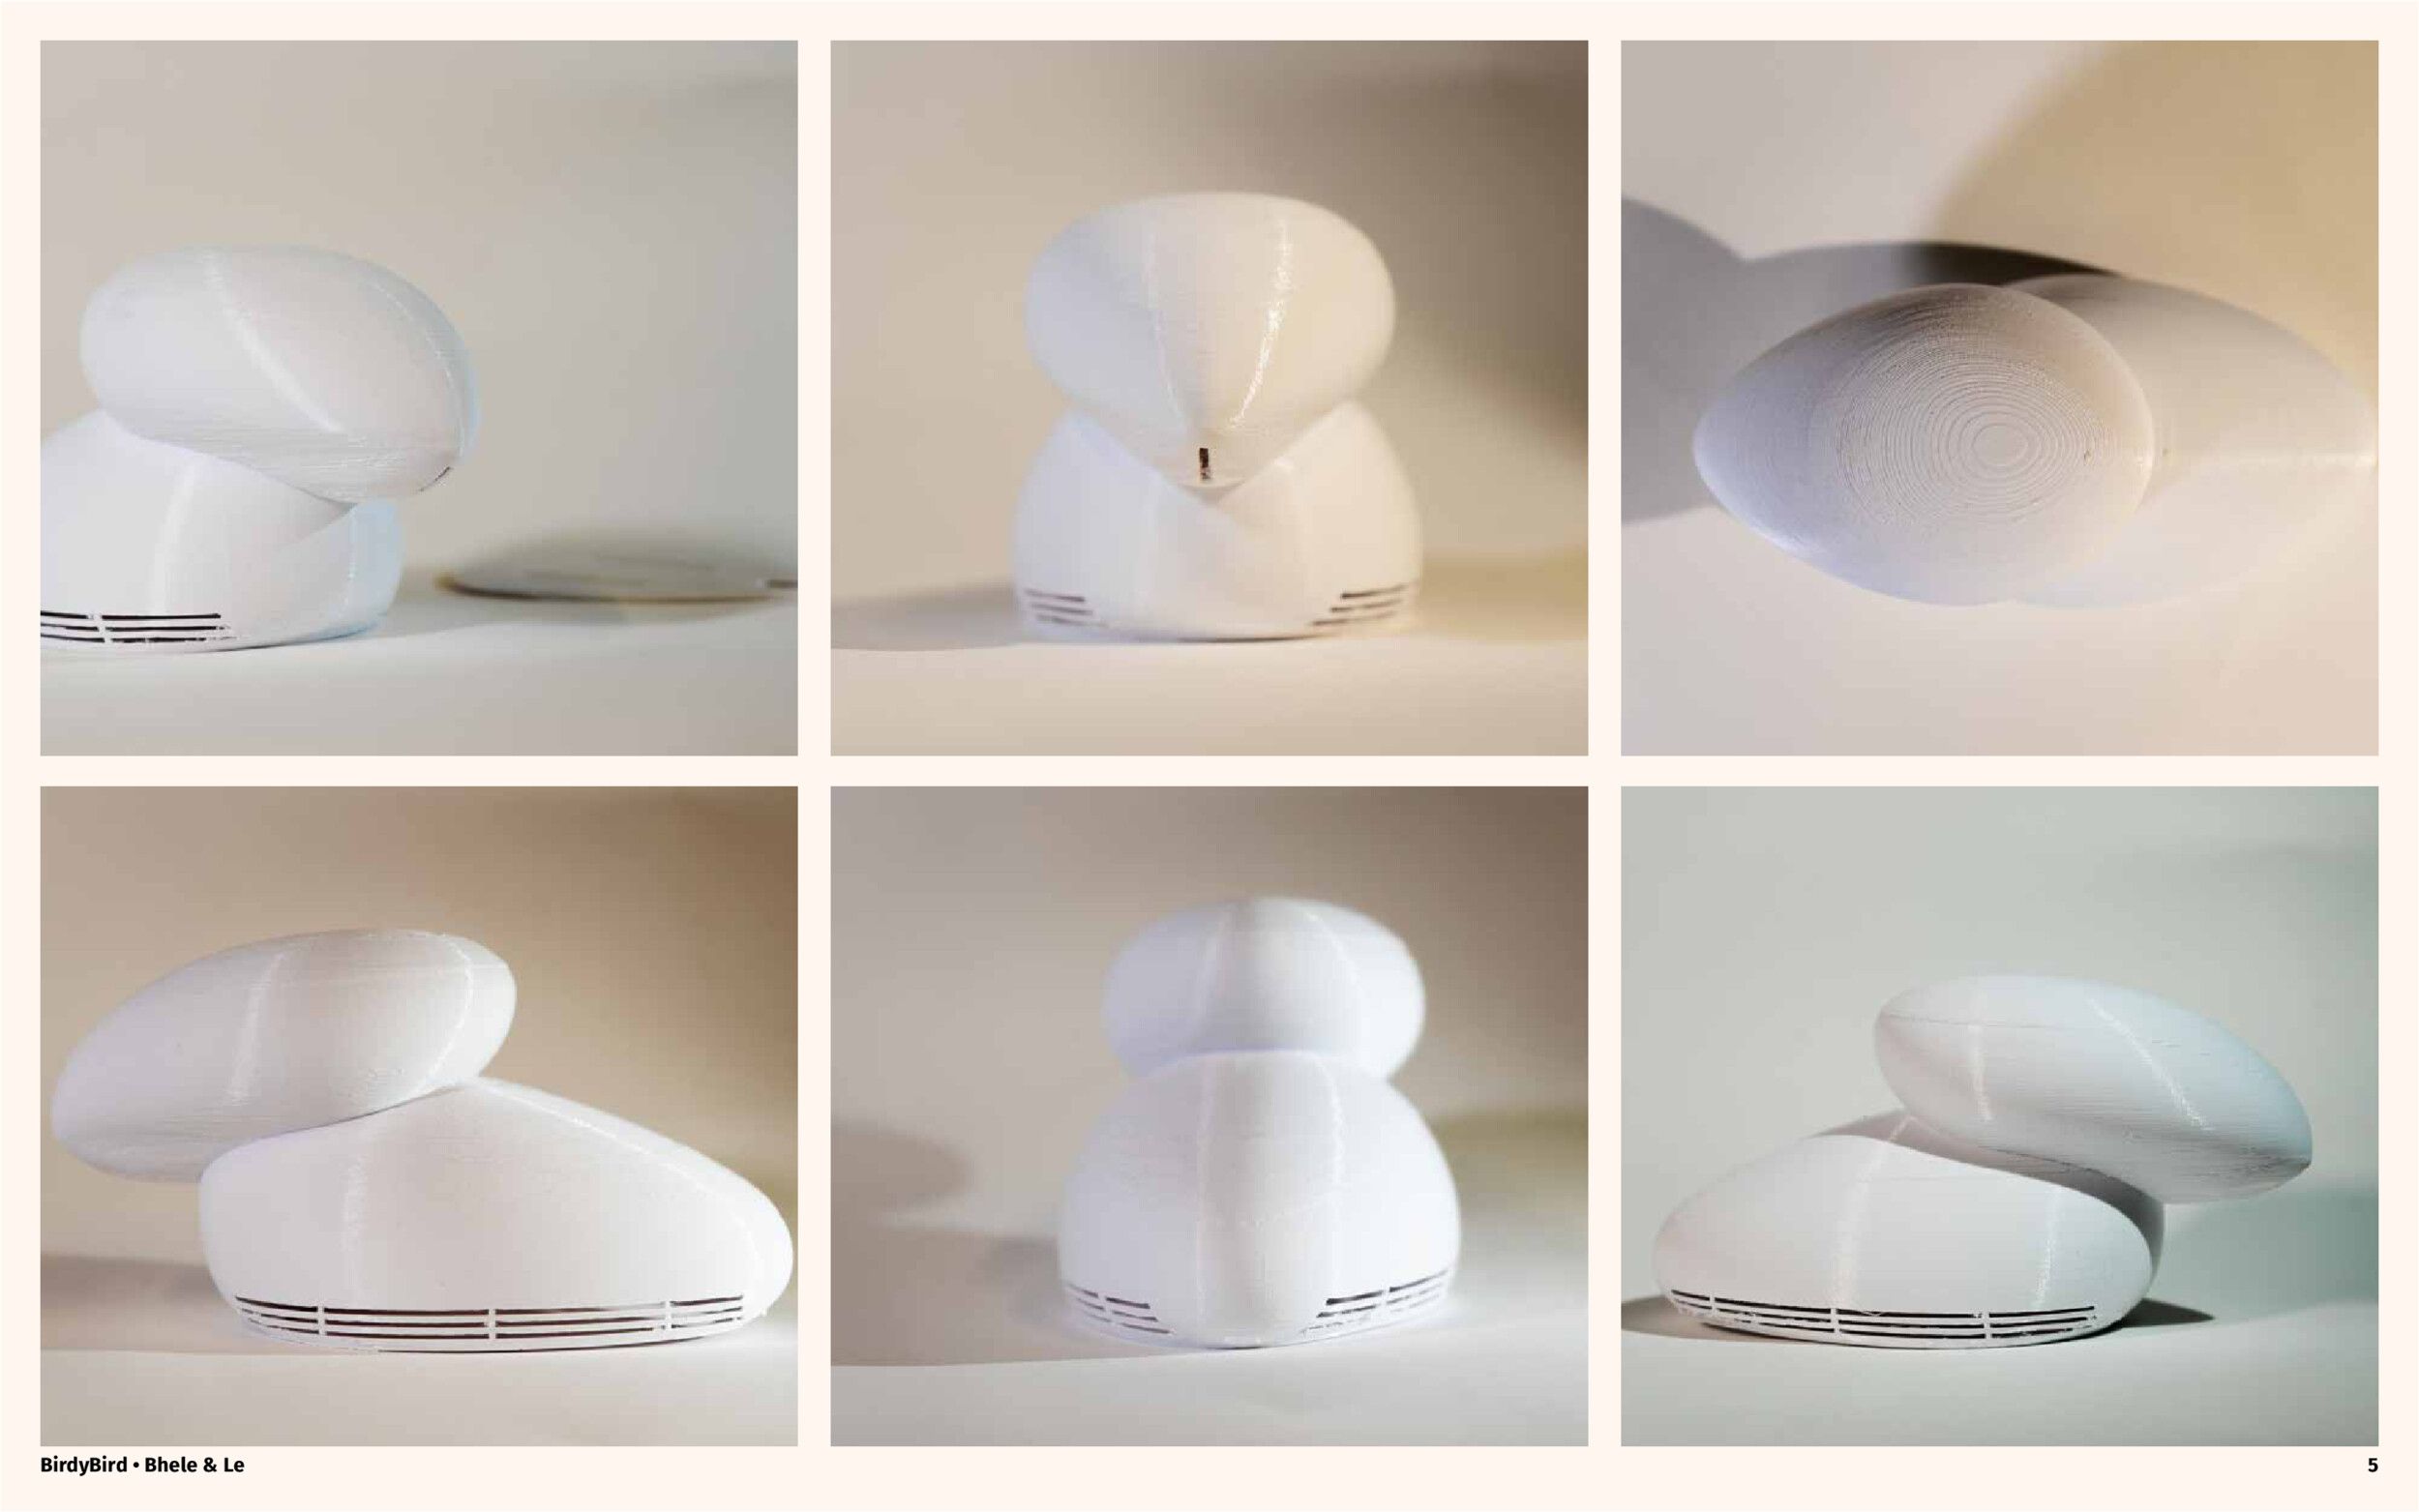 The 3D printed BirdyBird shell, a white and curvy plastic shell that resembles an abstract bird.